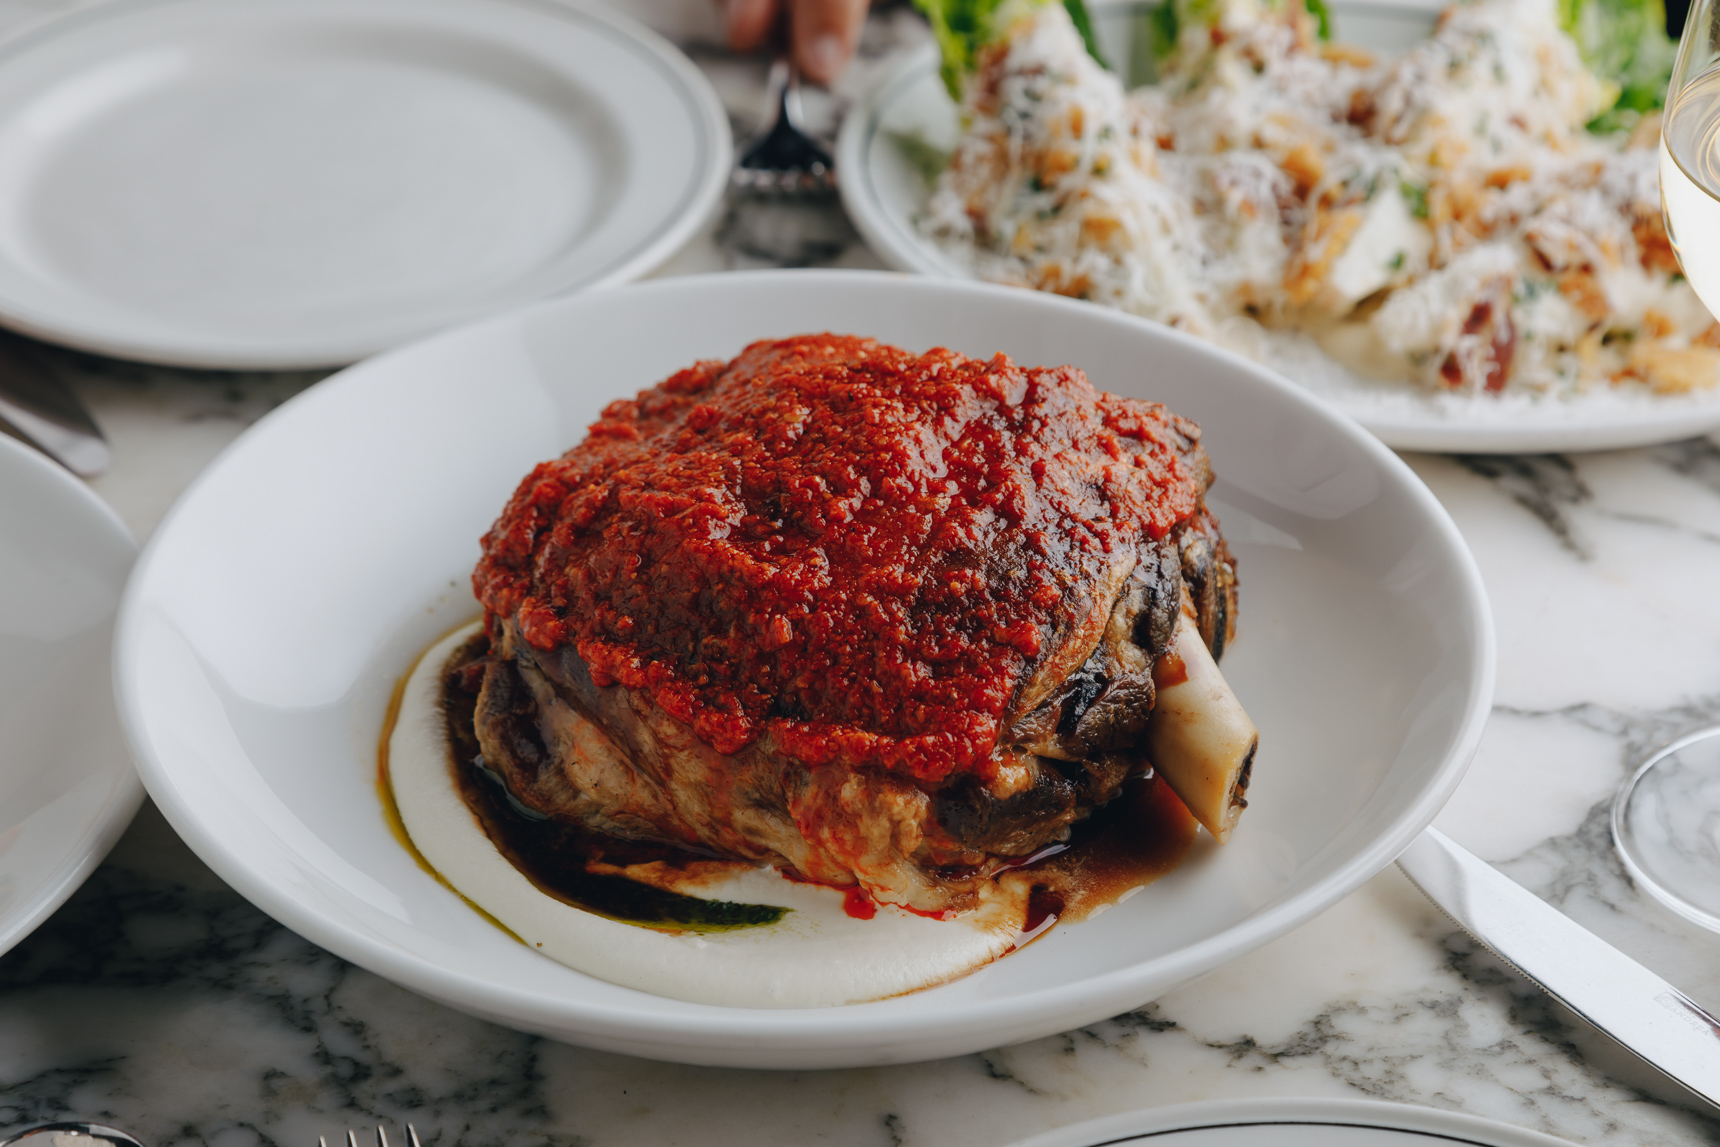 Cumulus Inc's lamb shoulder, which has been a fixture on the menu for 10 years
